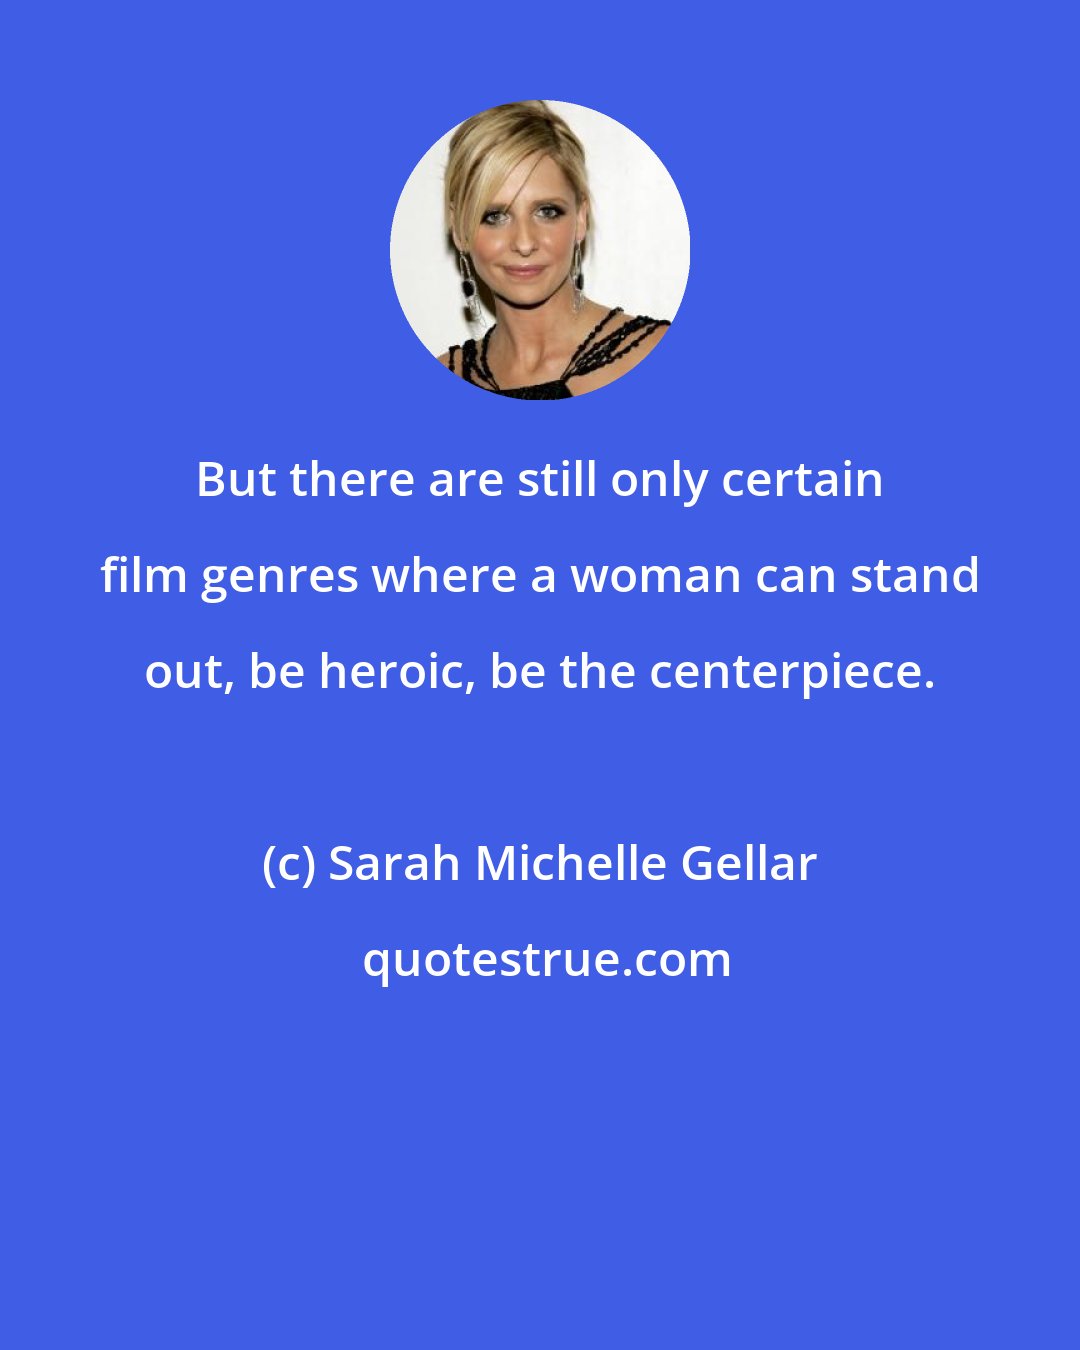 Sarah Michelle Gellar: But there are still only certain film genres where a woman can stand out, be heroic, be the centerpiece.